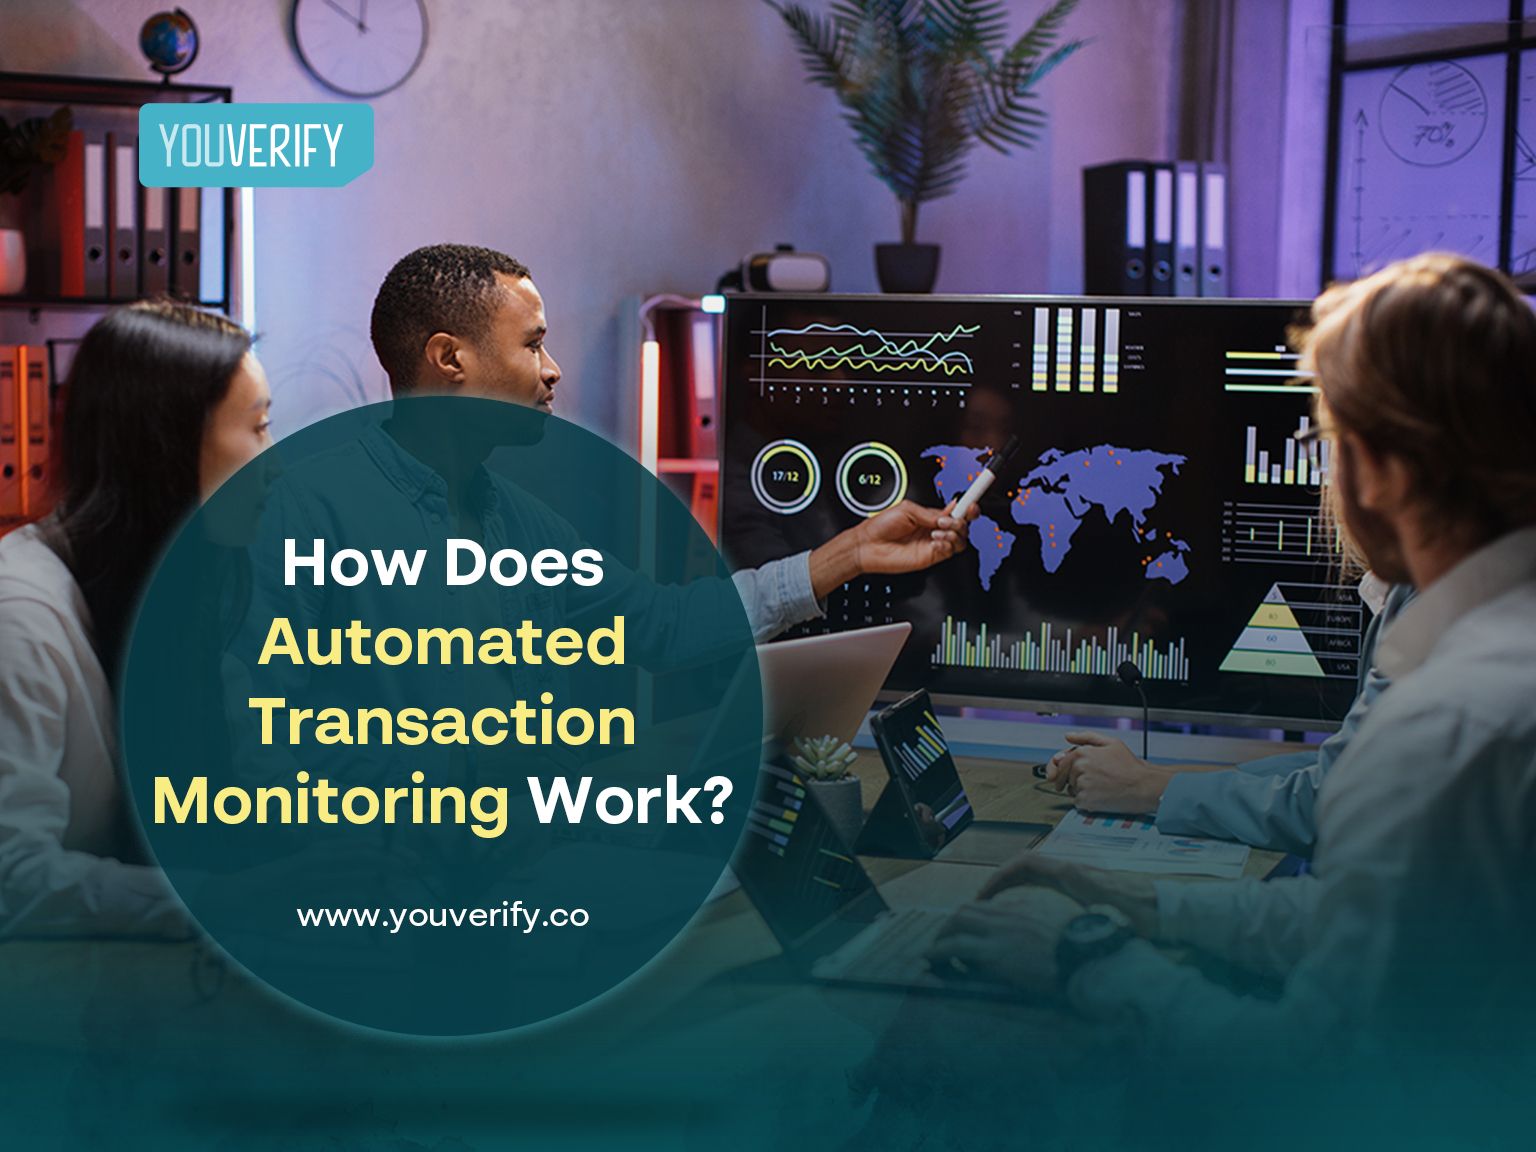 How does Automated Transaction Monitoring Work